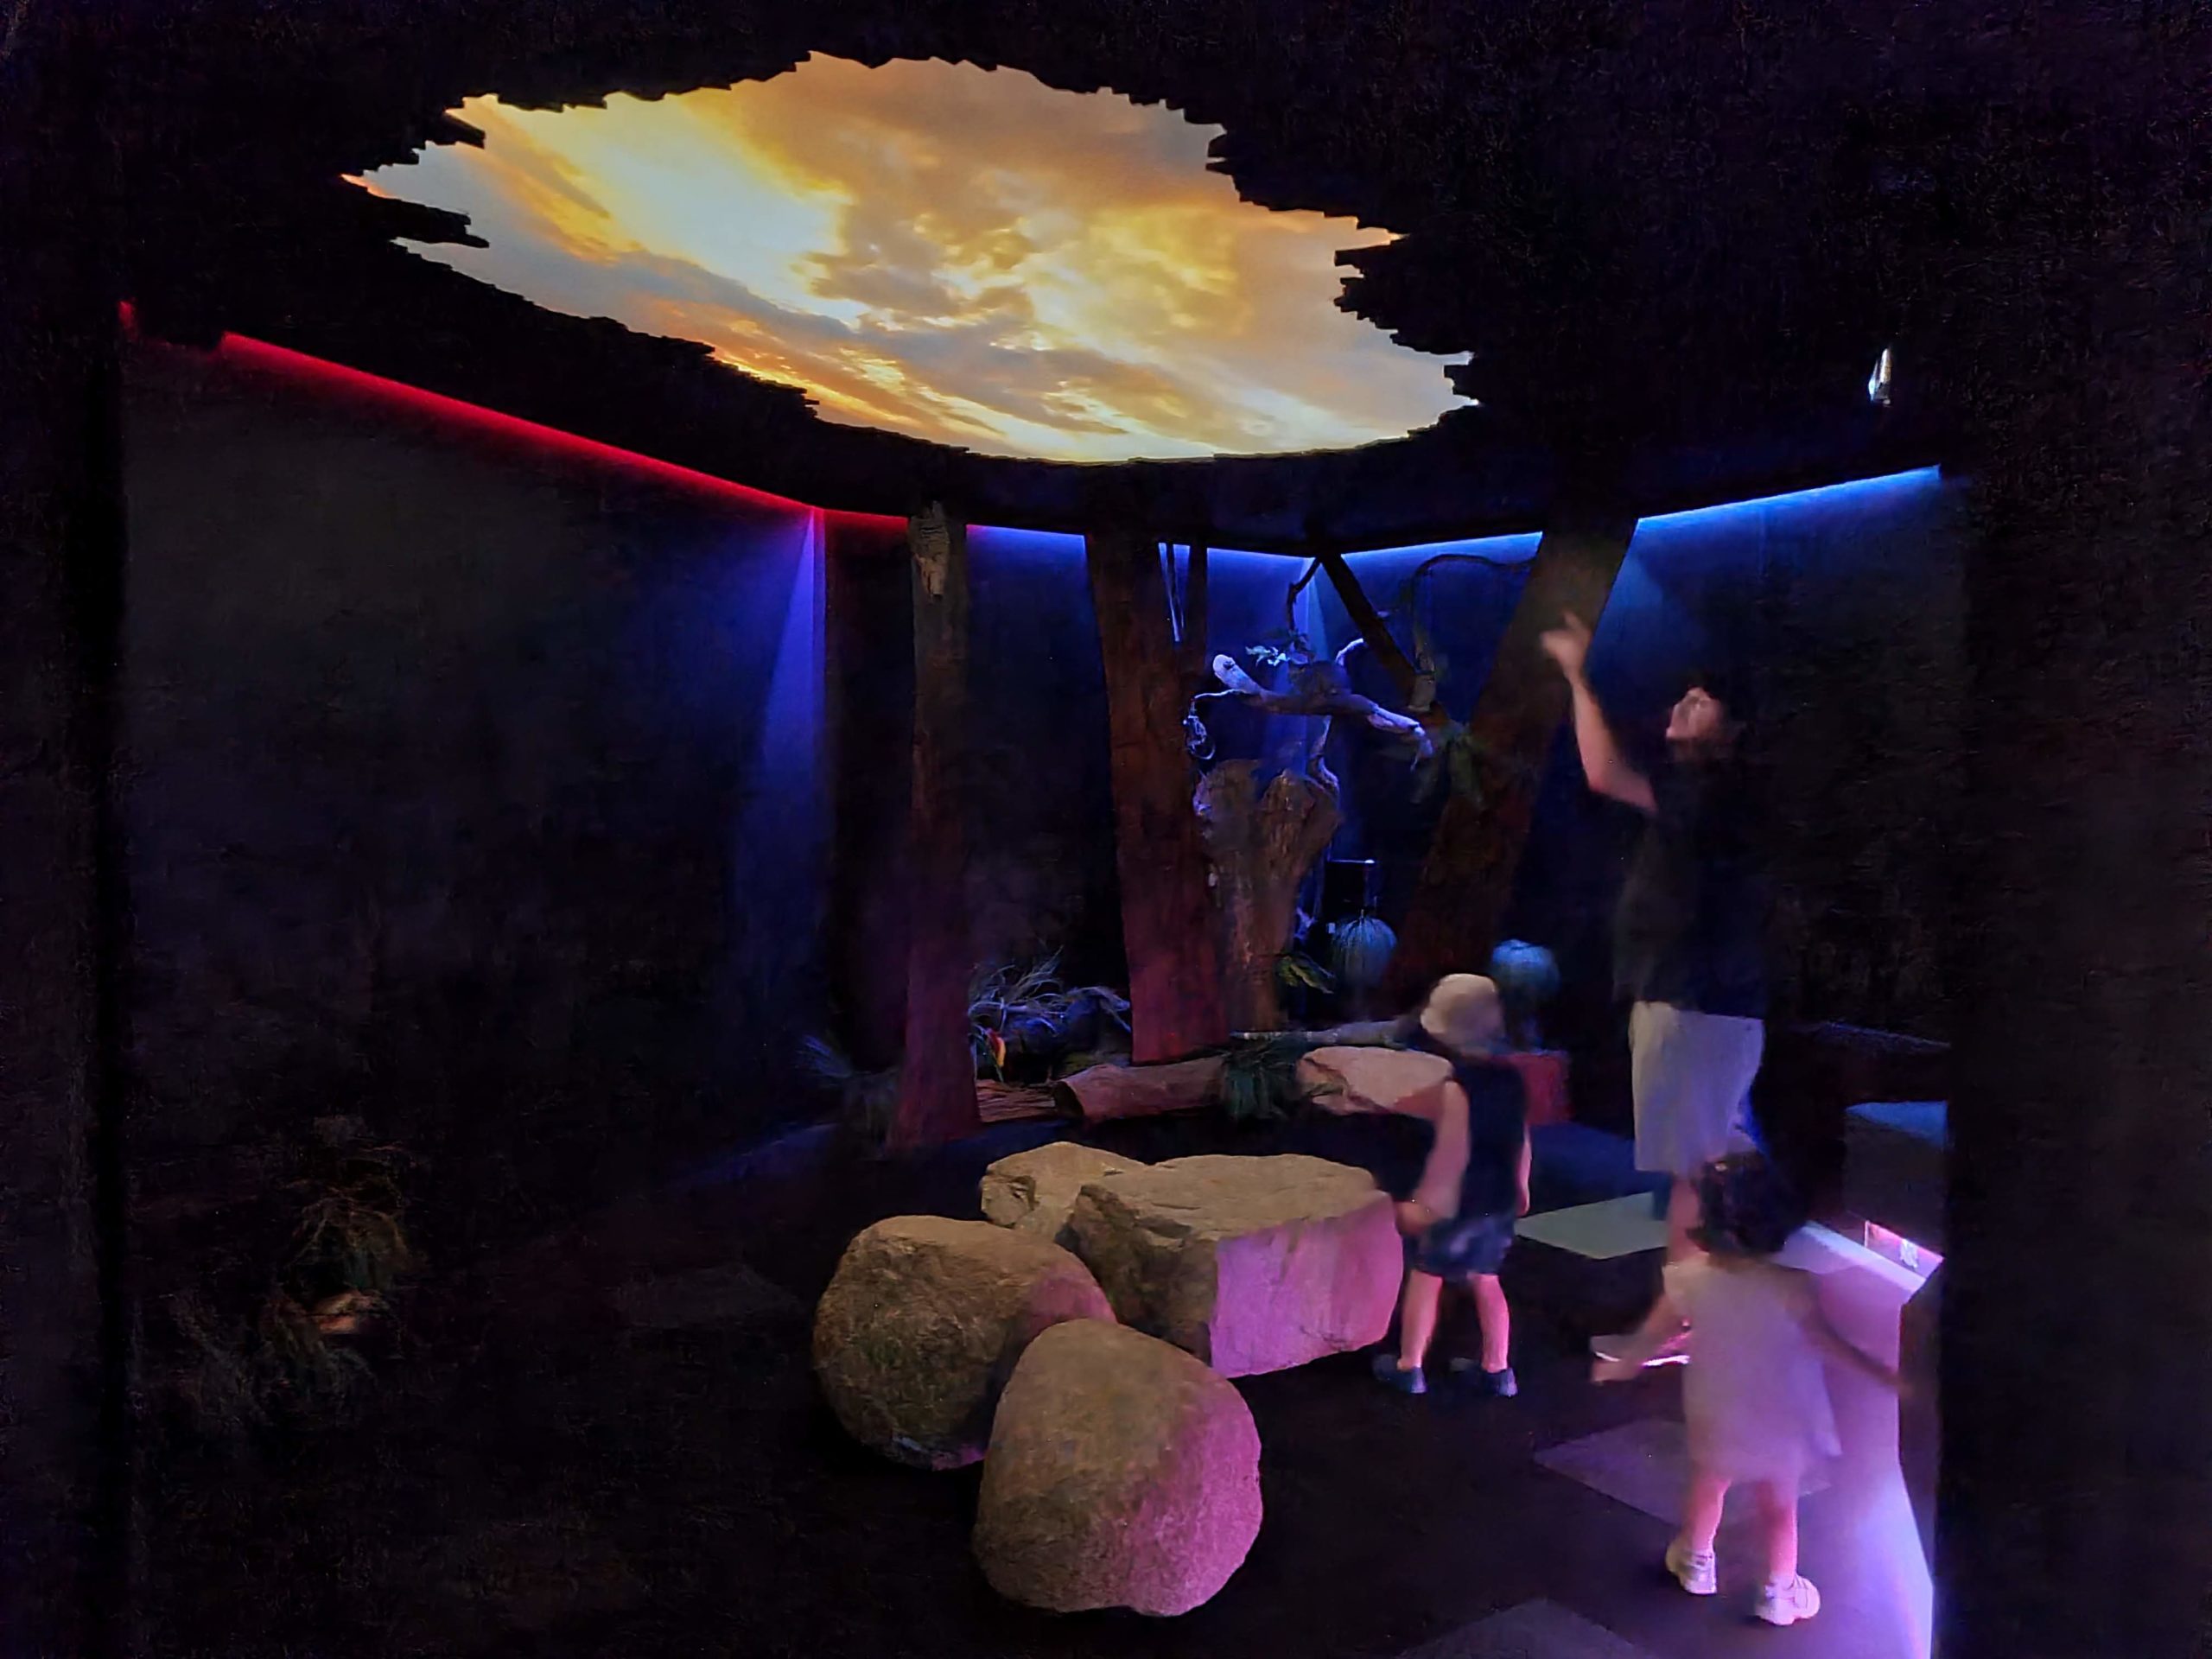 Karawatha Forest Park Discovery Centre Night Room